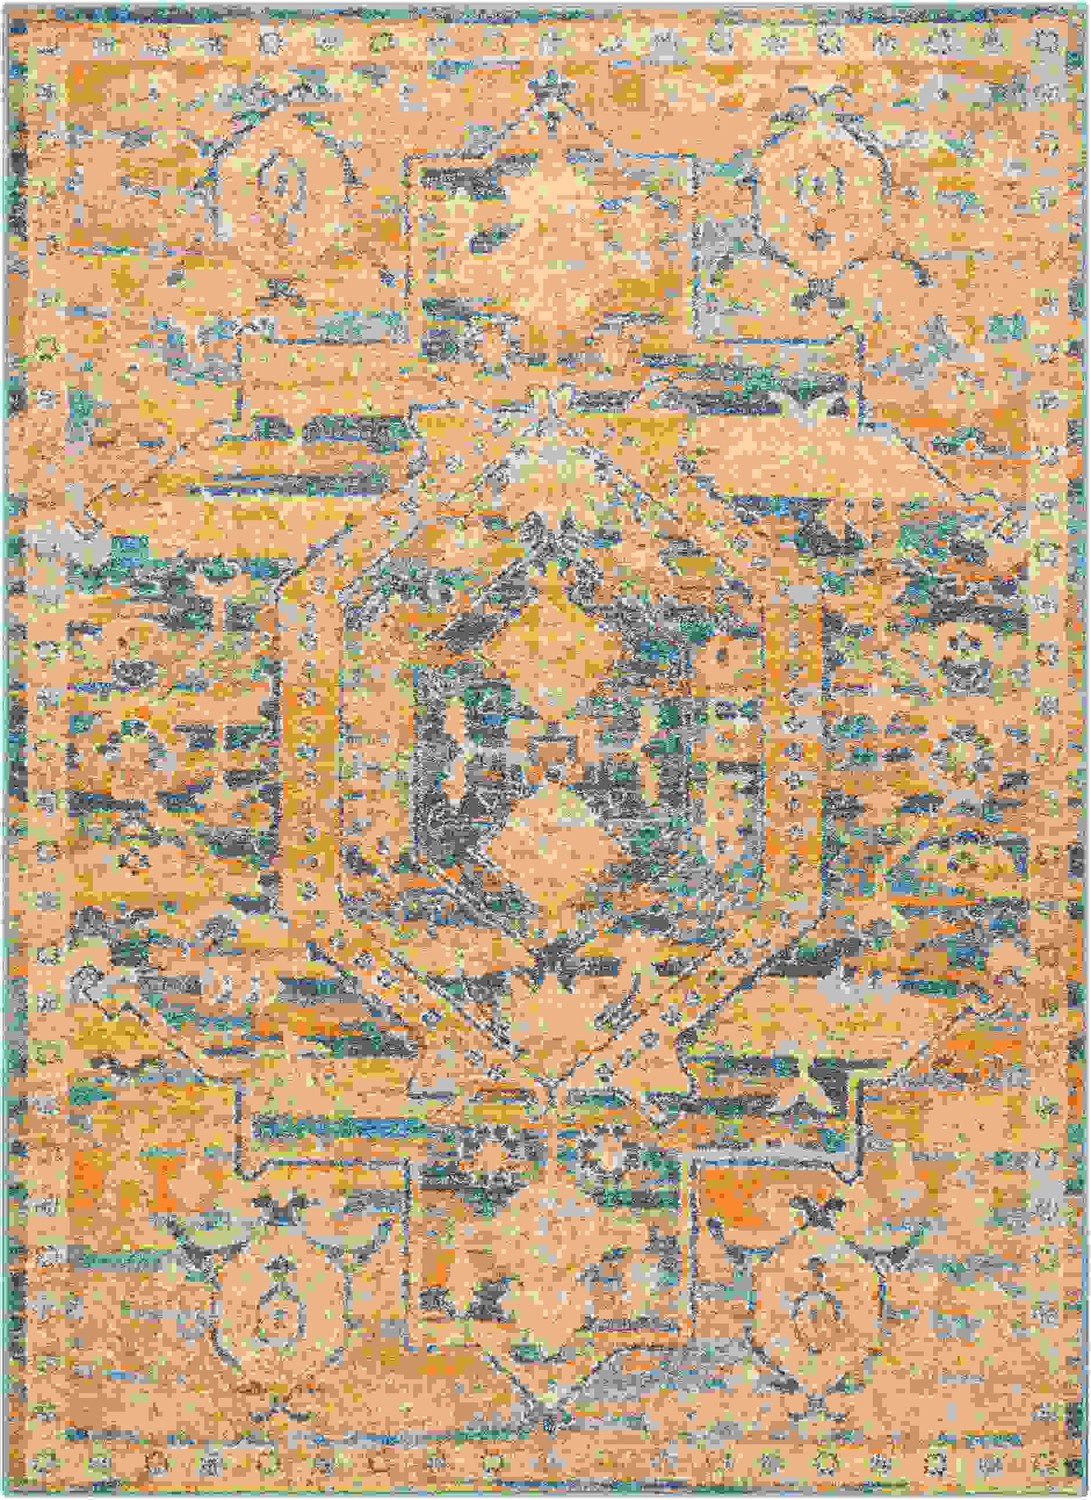 7 x 10 Gold and Blue Antique Area Rug